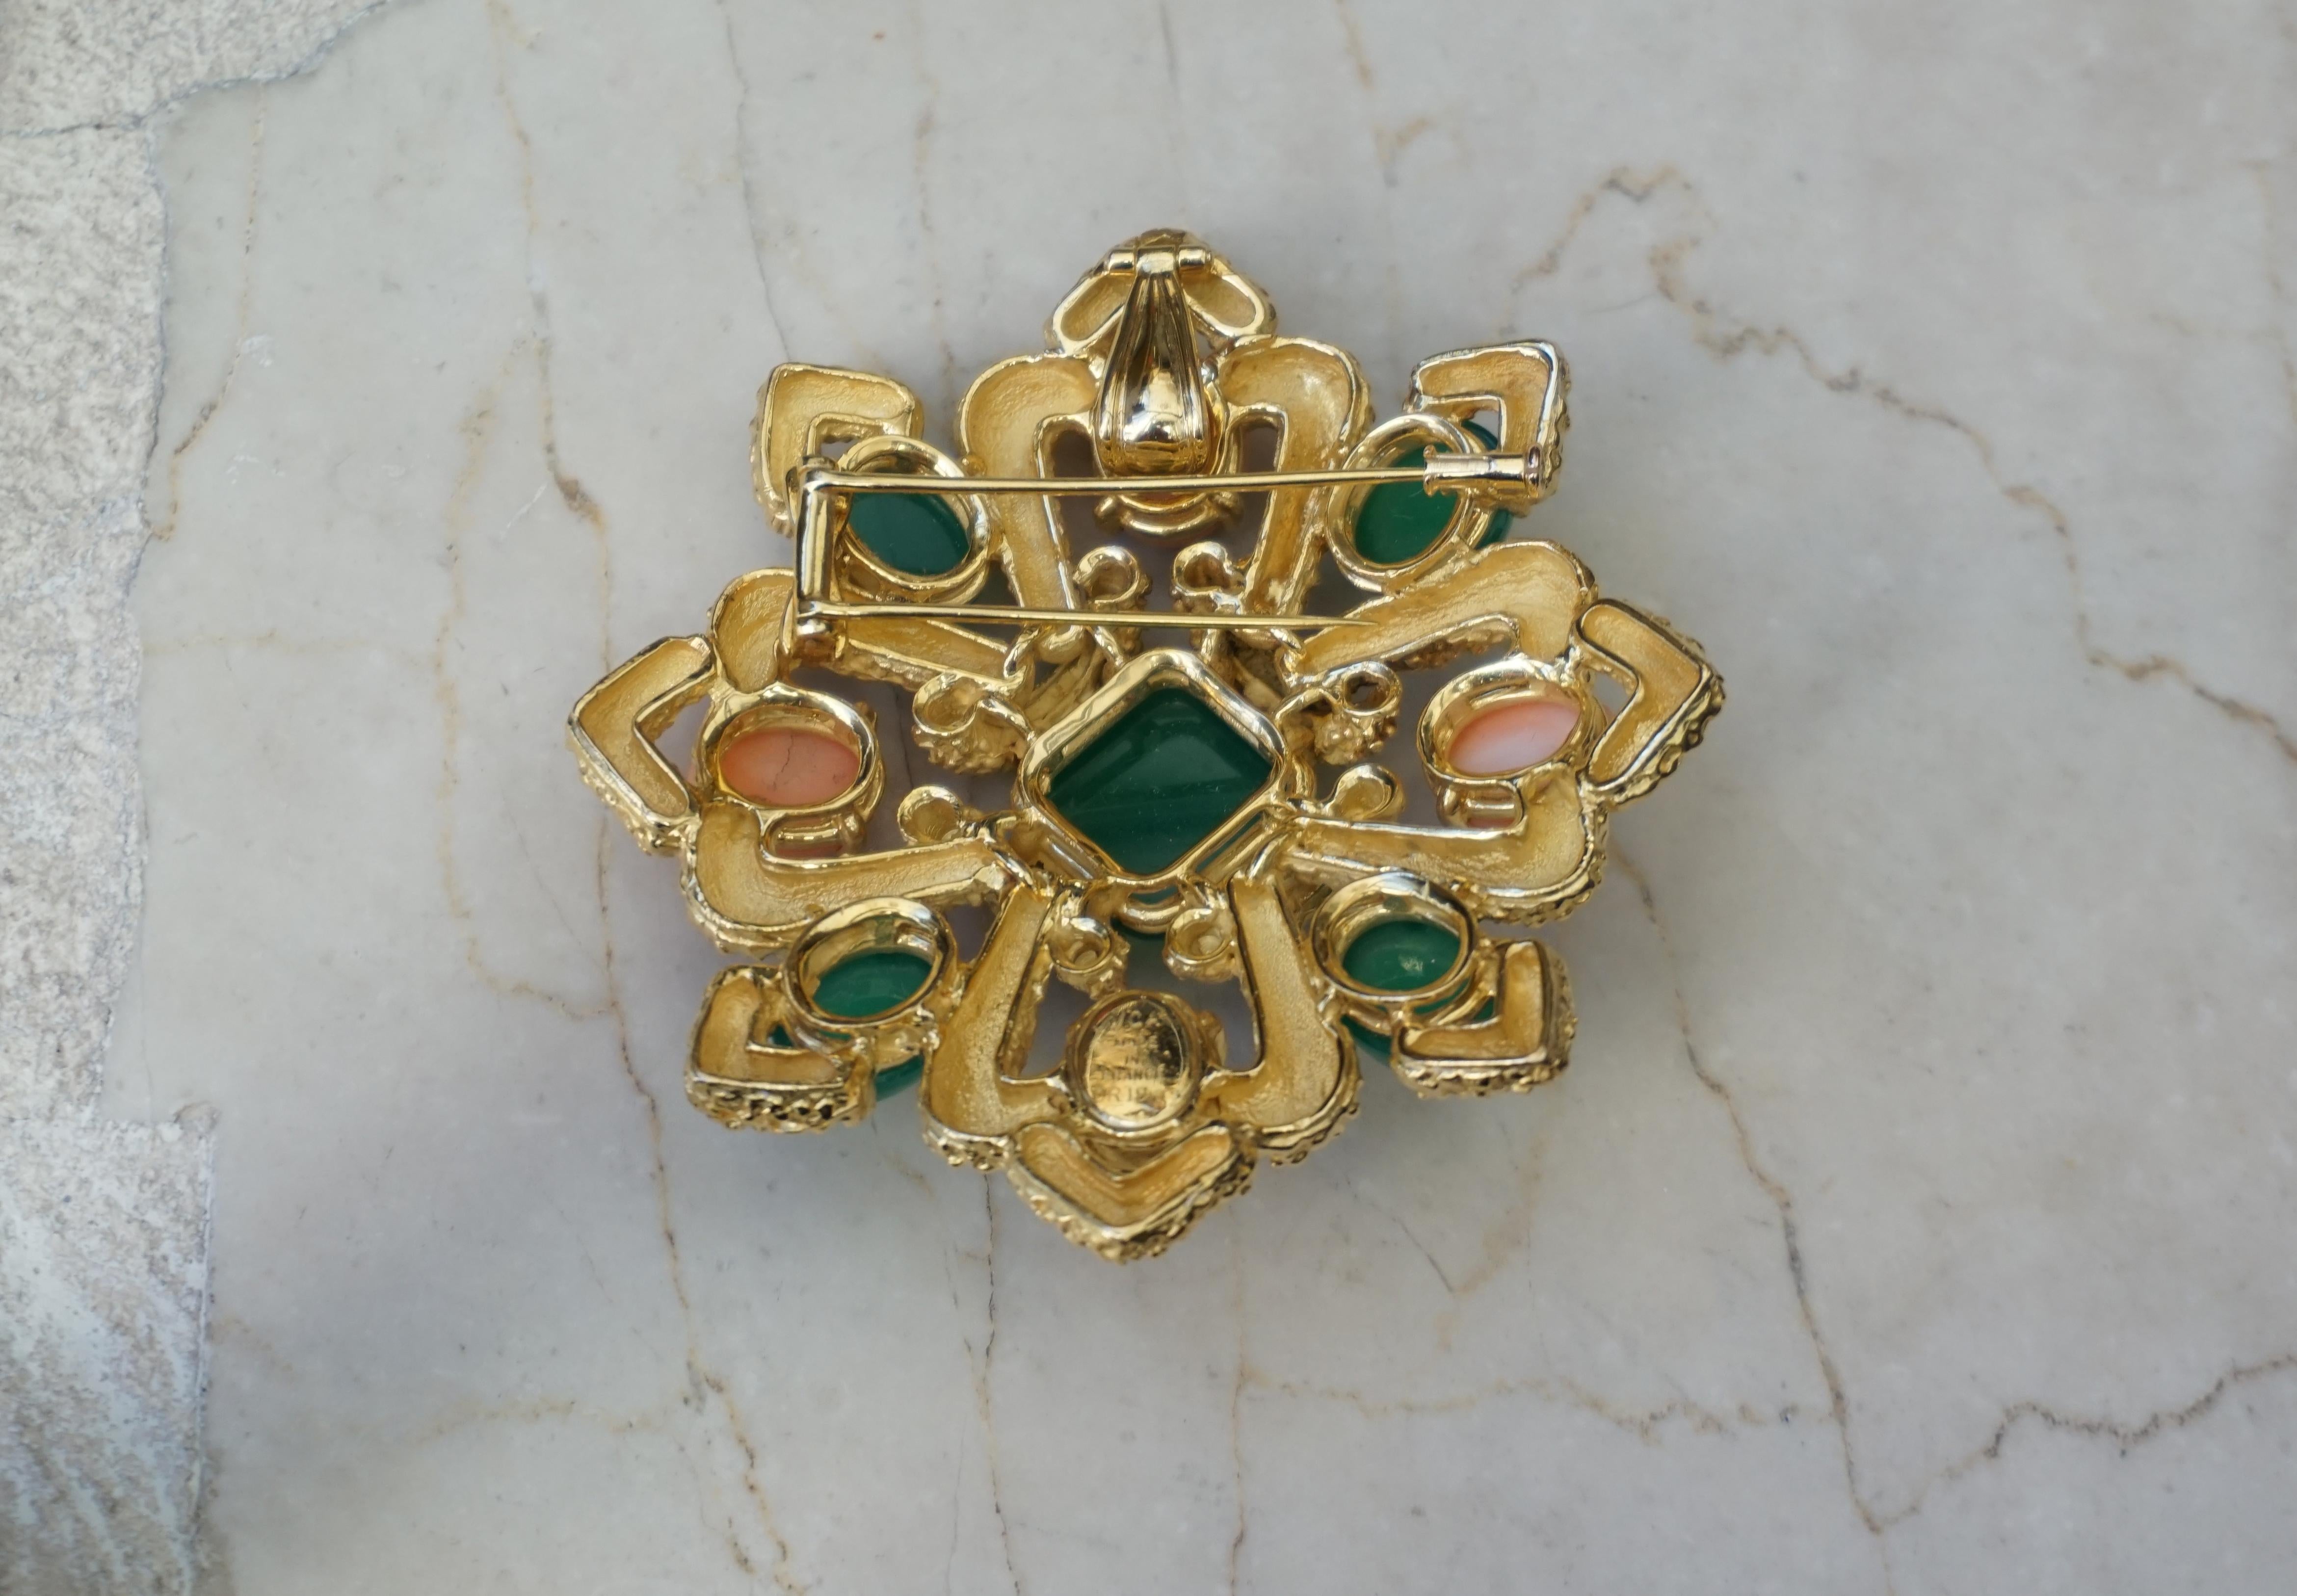 Van Cleef & Arpels 18K Gold Chrysoprase and Coral Pendant Brooch For Sale 5